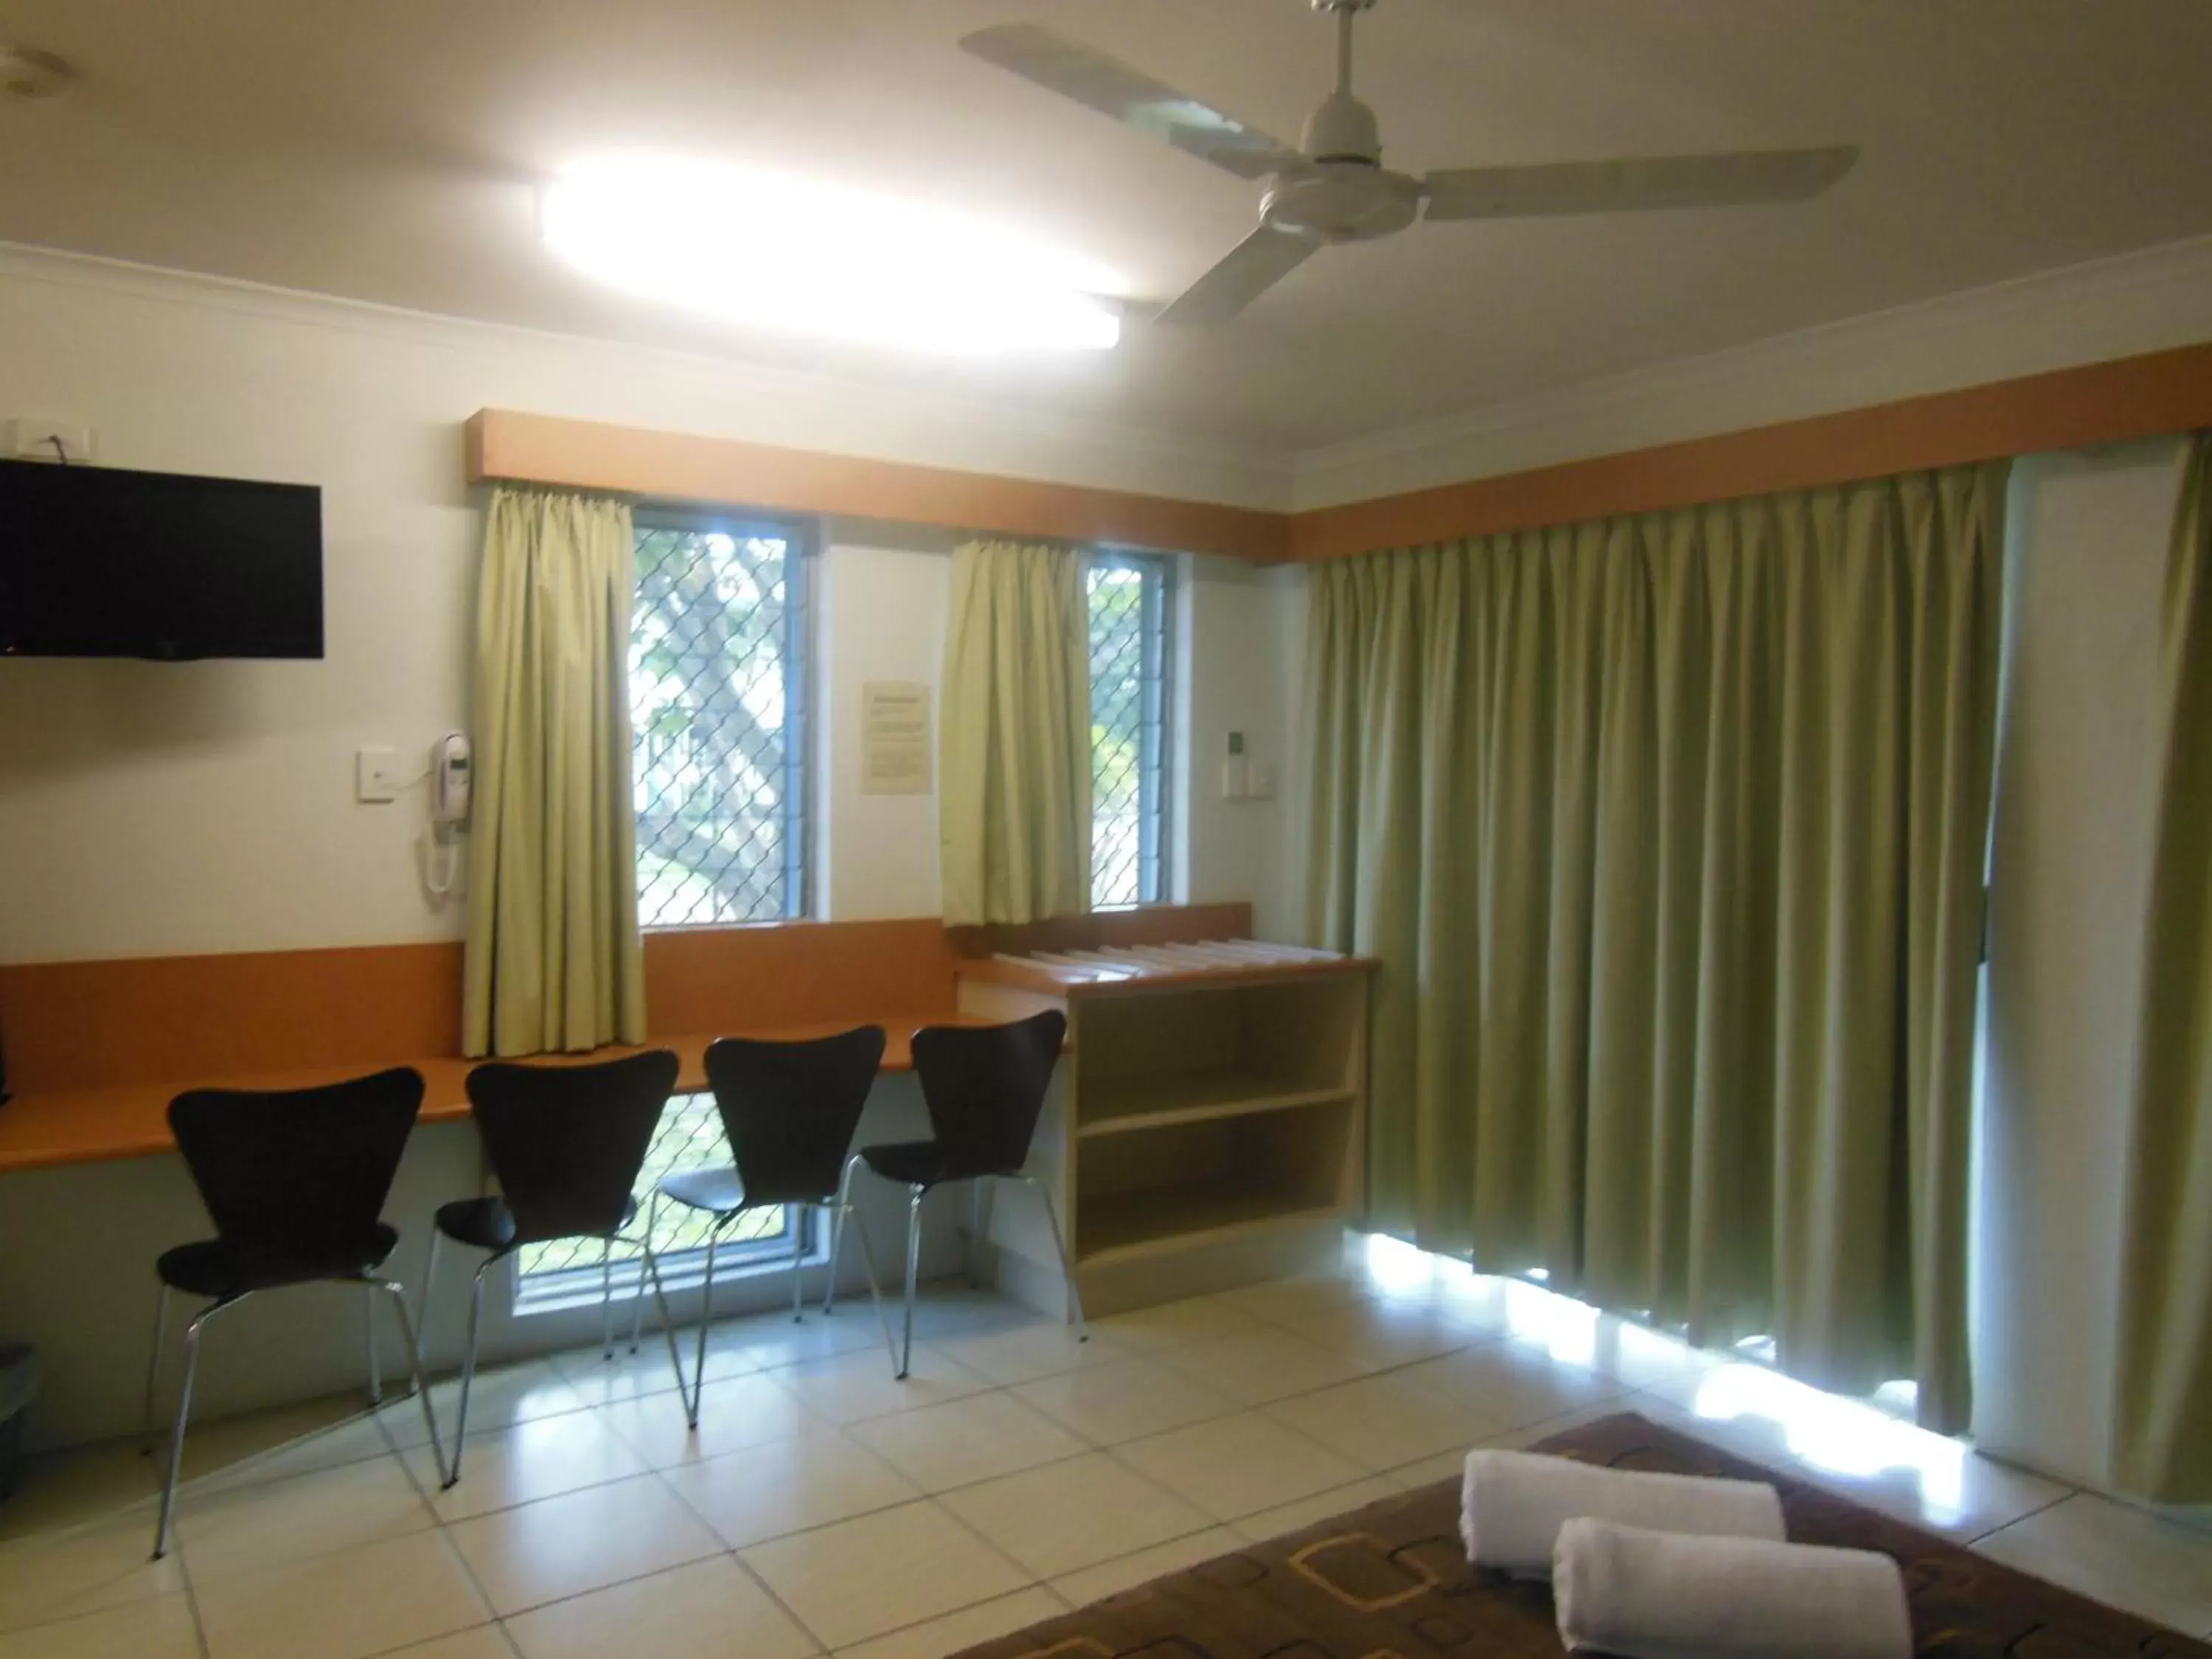 Dining area in Country Road Motel